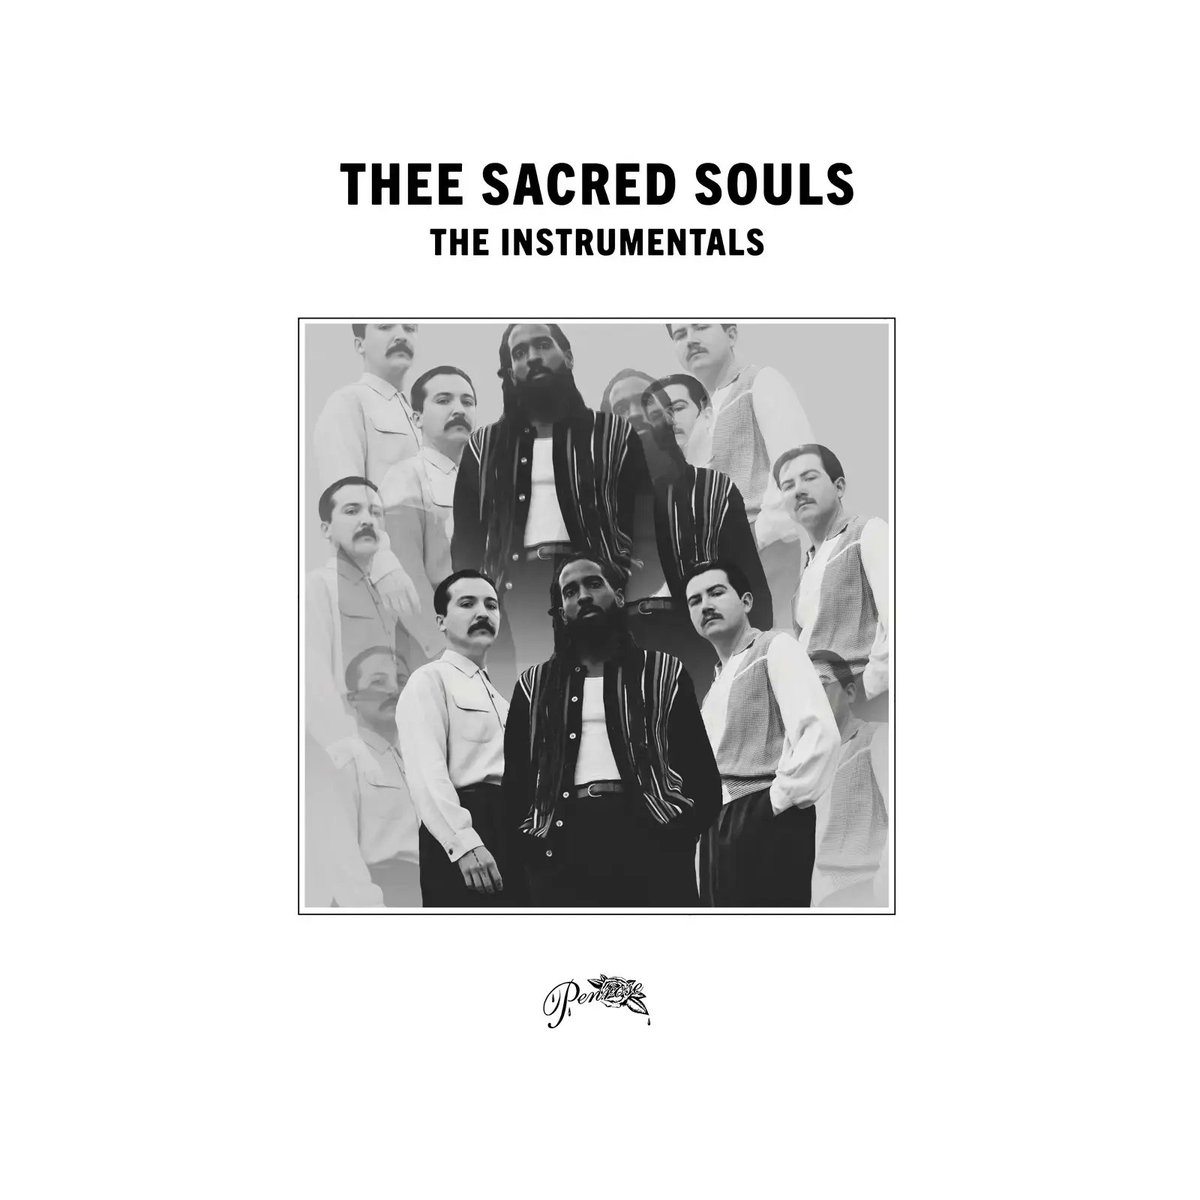 Introducing the Instrumental album for @TheeSacredSouls critically acclaimed, self-titled debut! via @PenroseRecords roughtrade.com/en-us/product/…